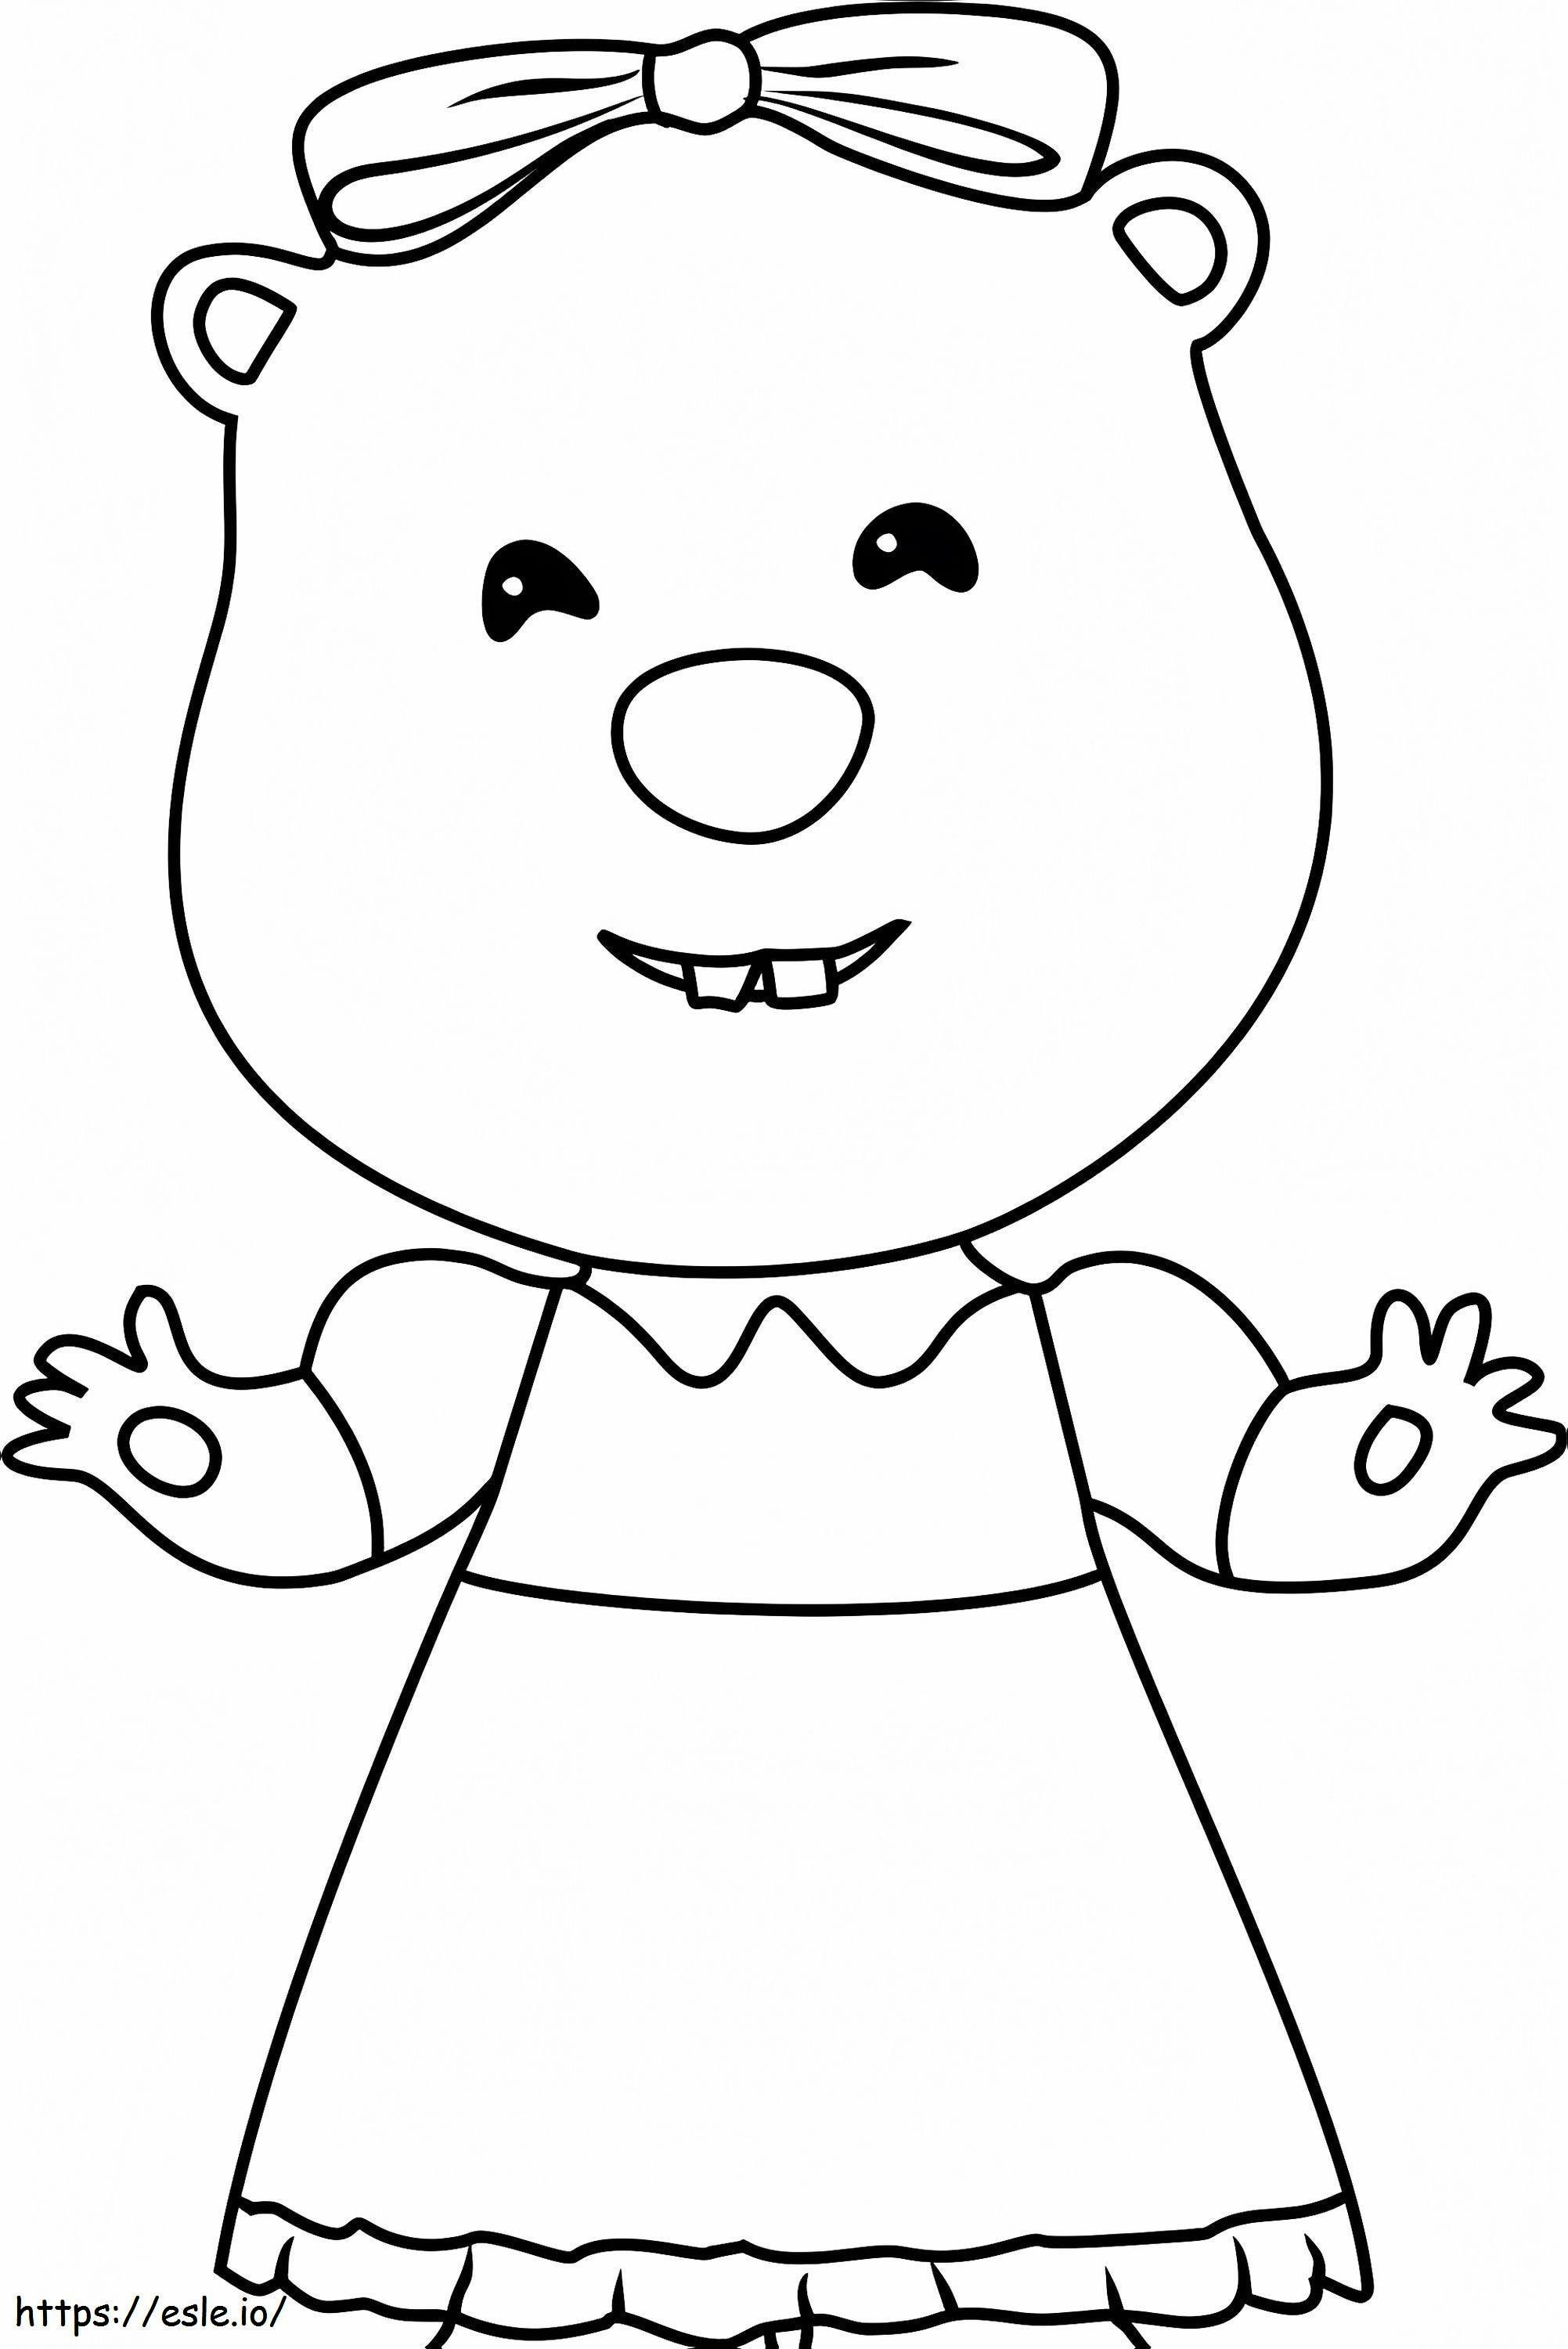 1532058579 Loopy Having Fun A4 coloring page